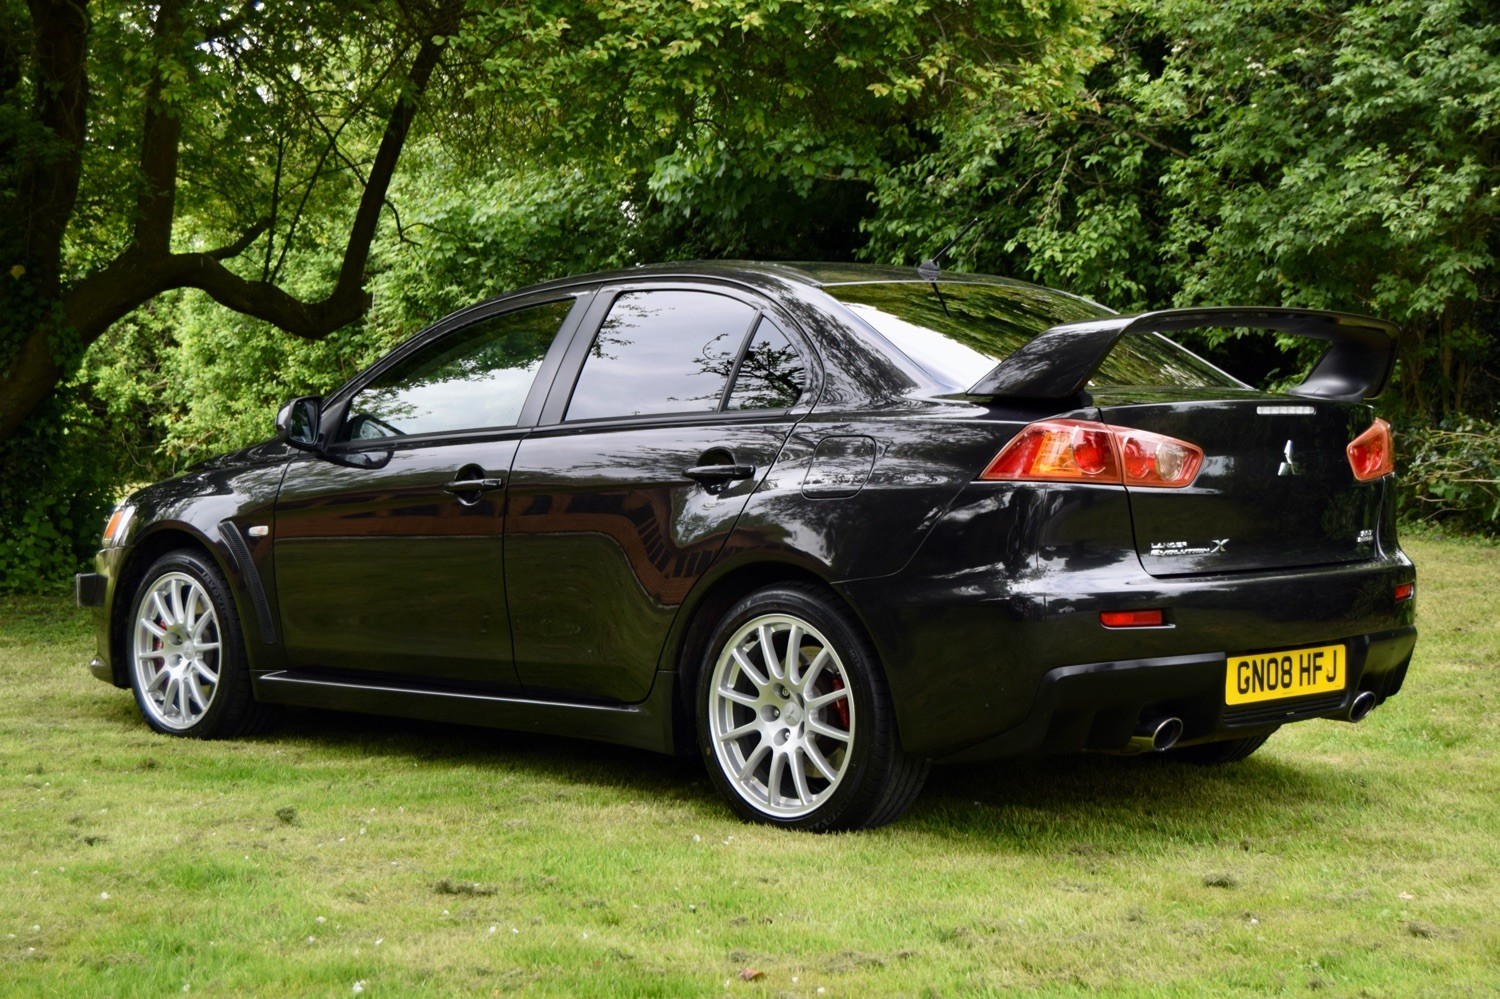 Used MITSUBISHI LANCER in Chesterfield, Derbyshire Ball